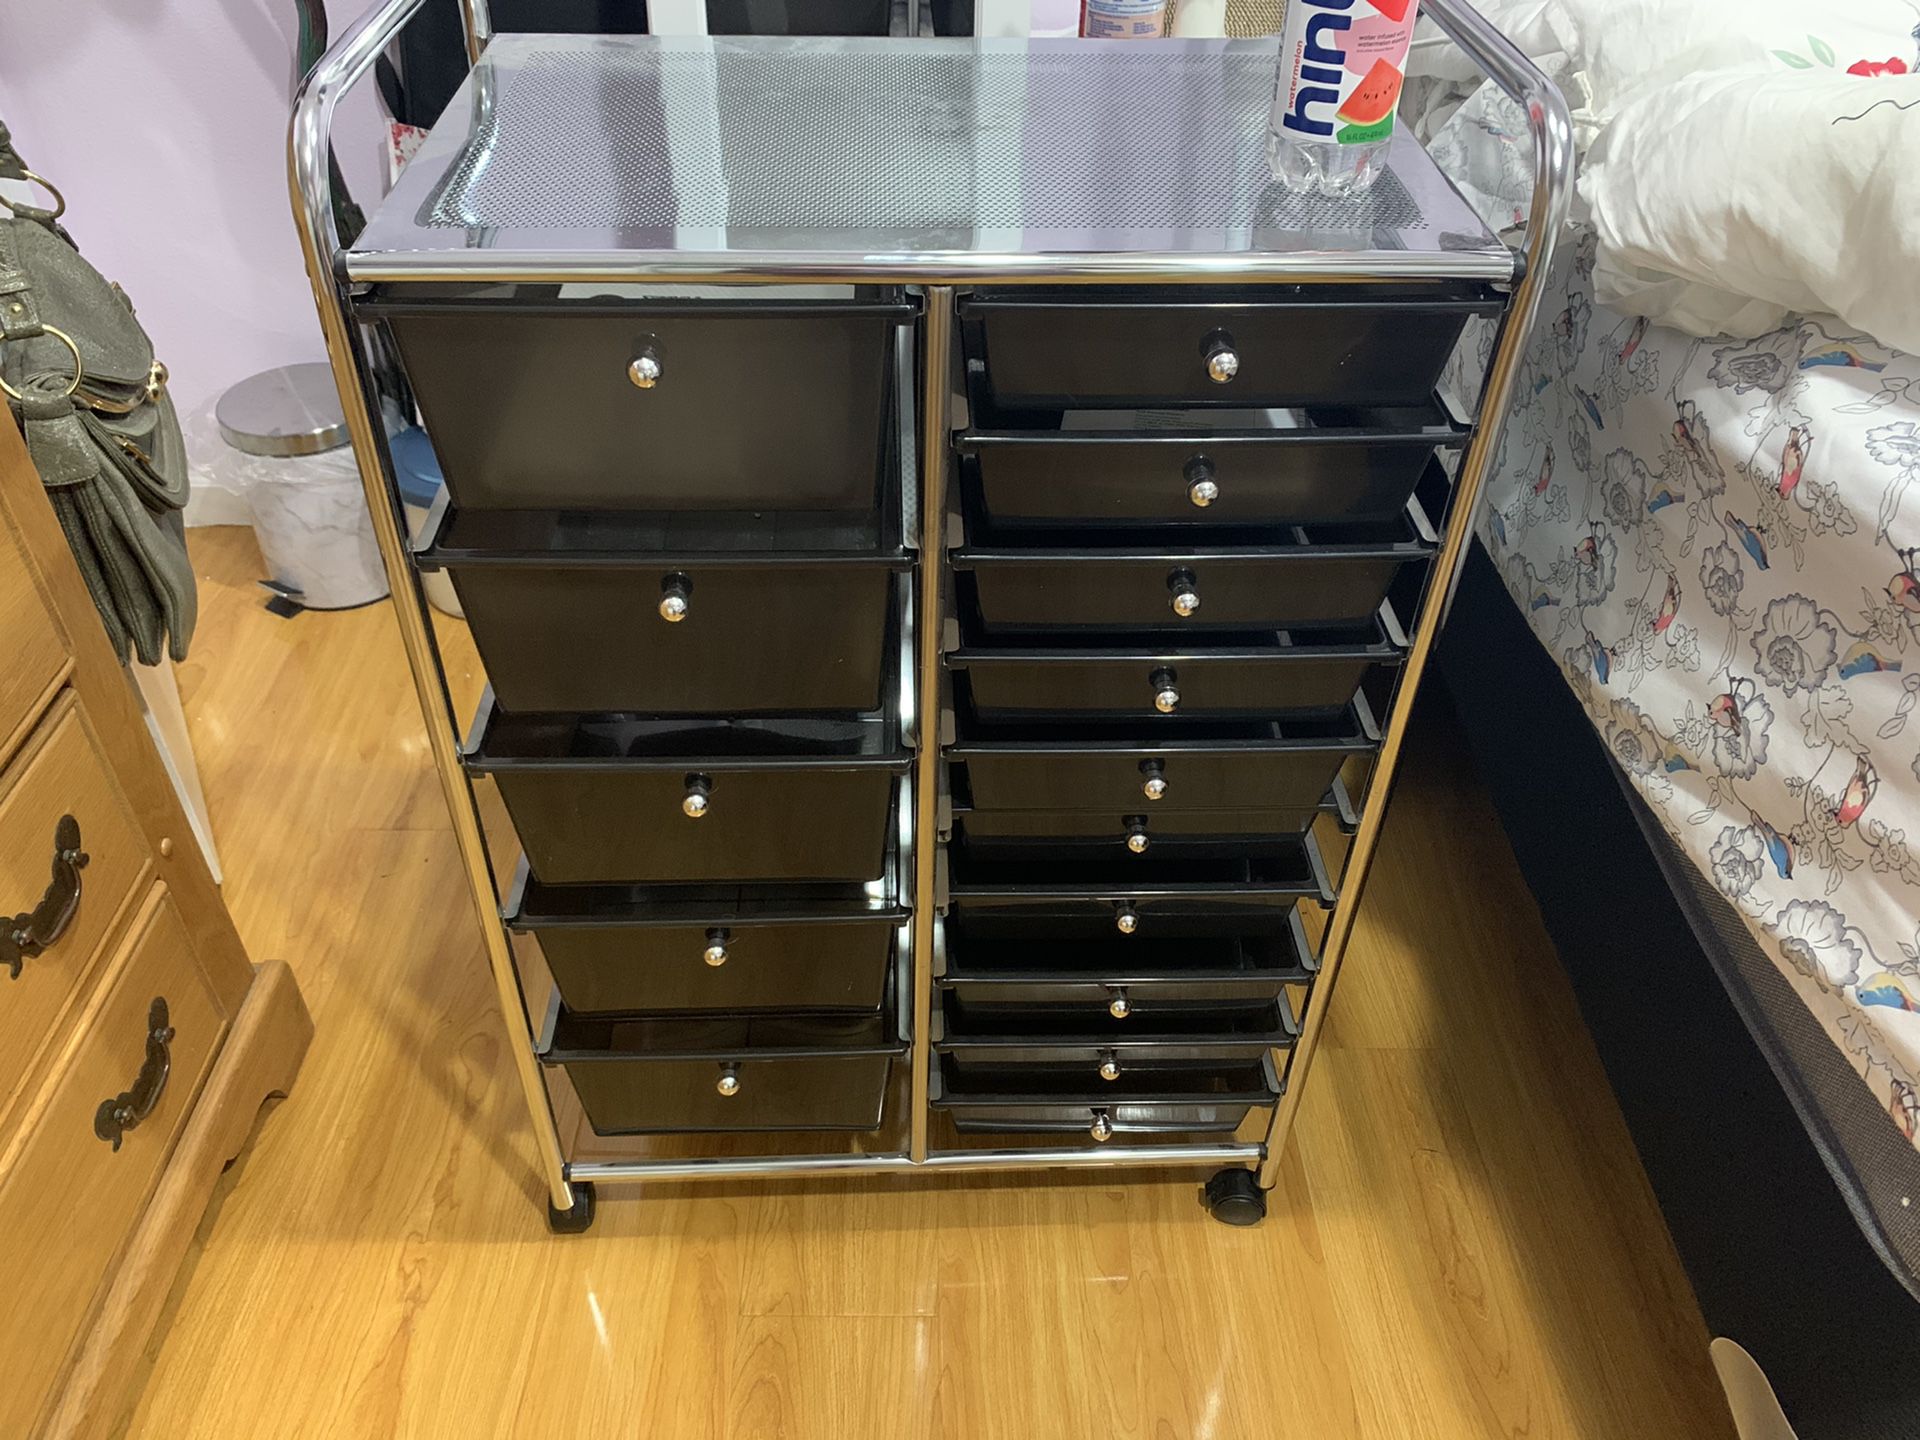 Plastic and chrome drawers